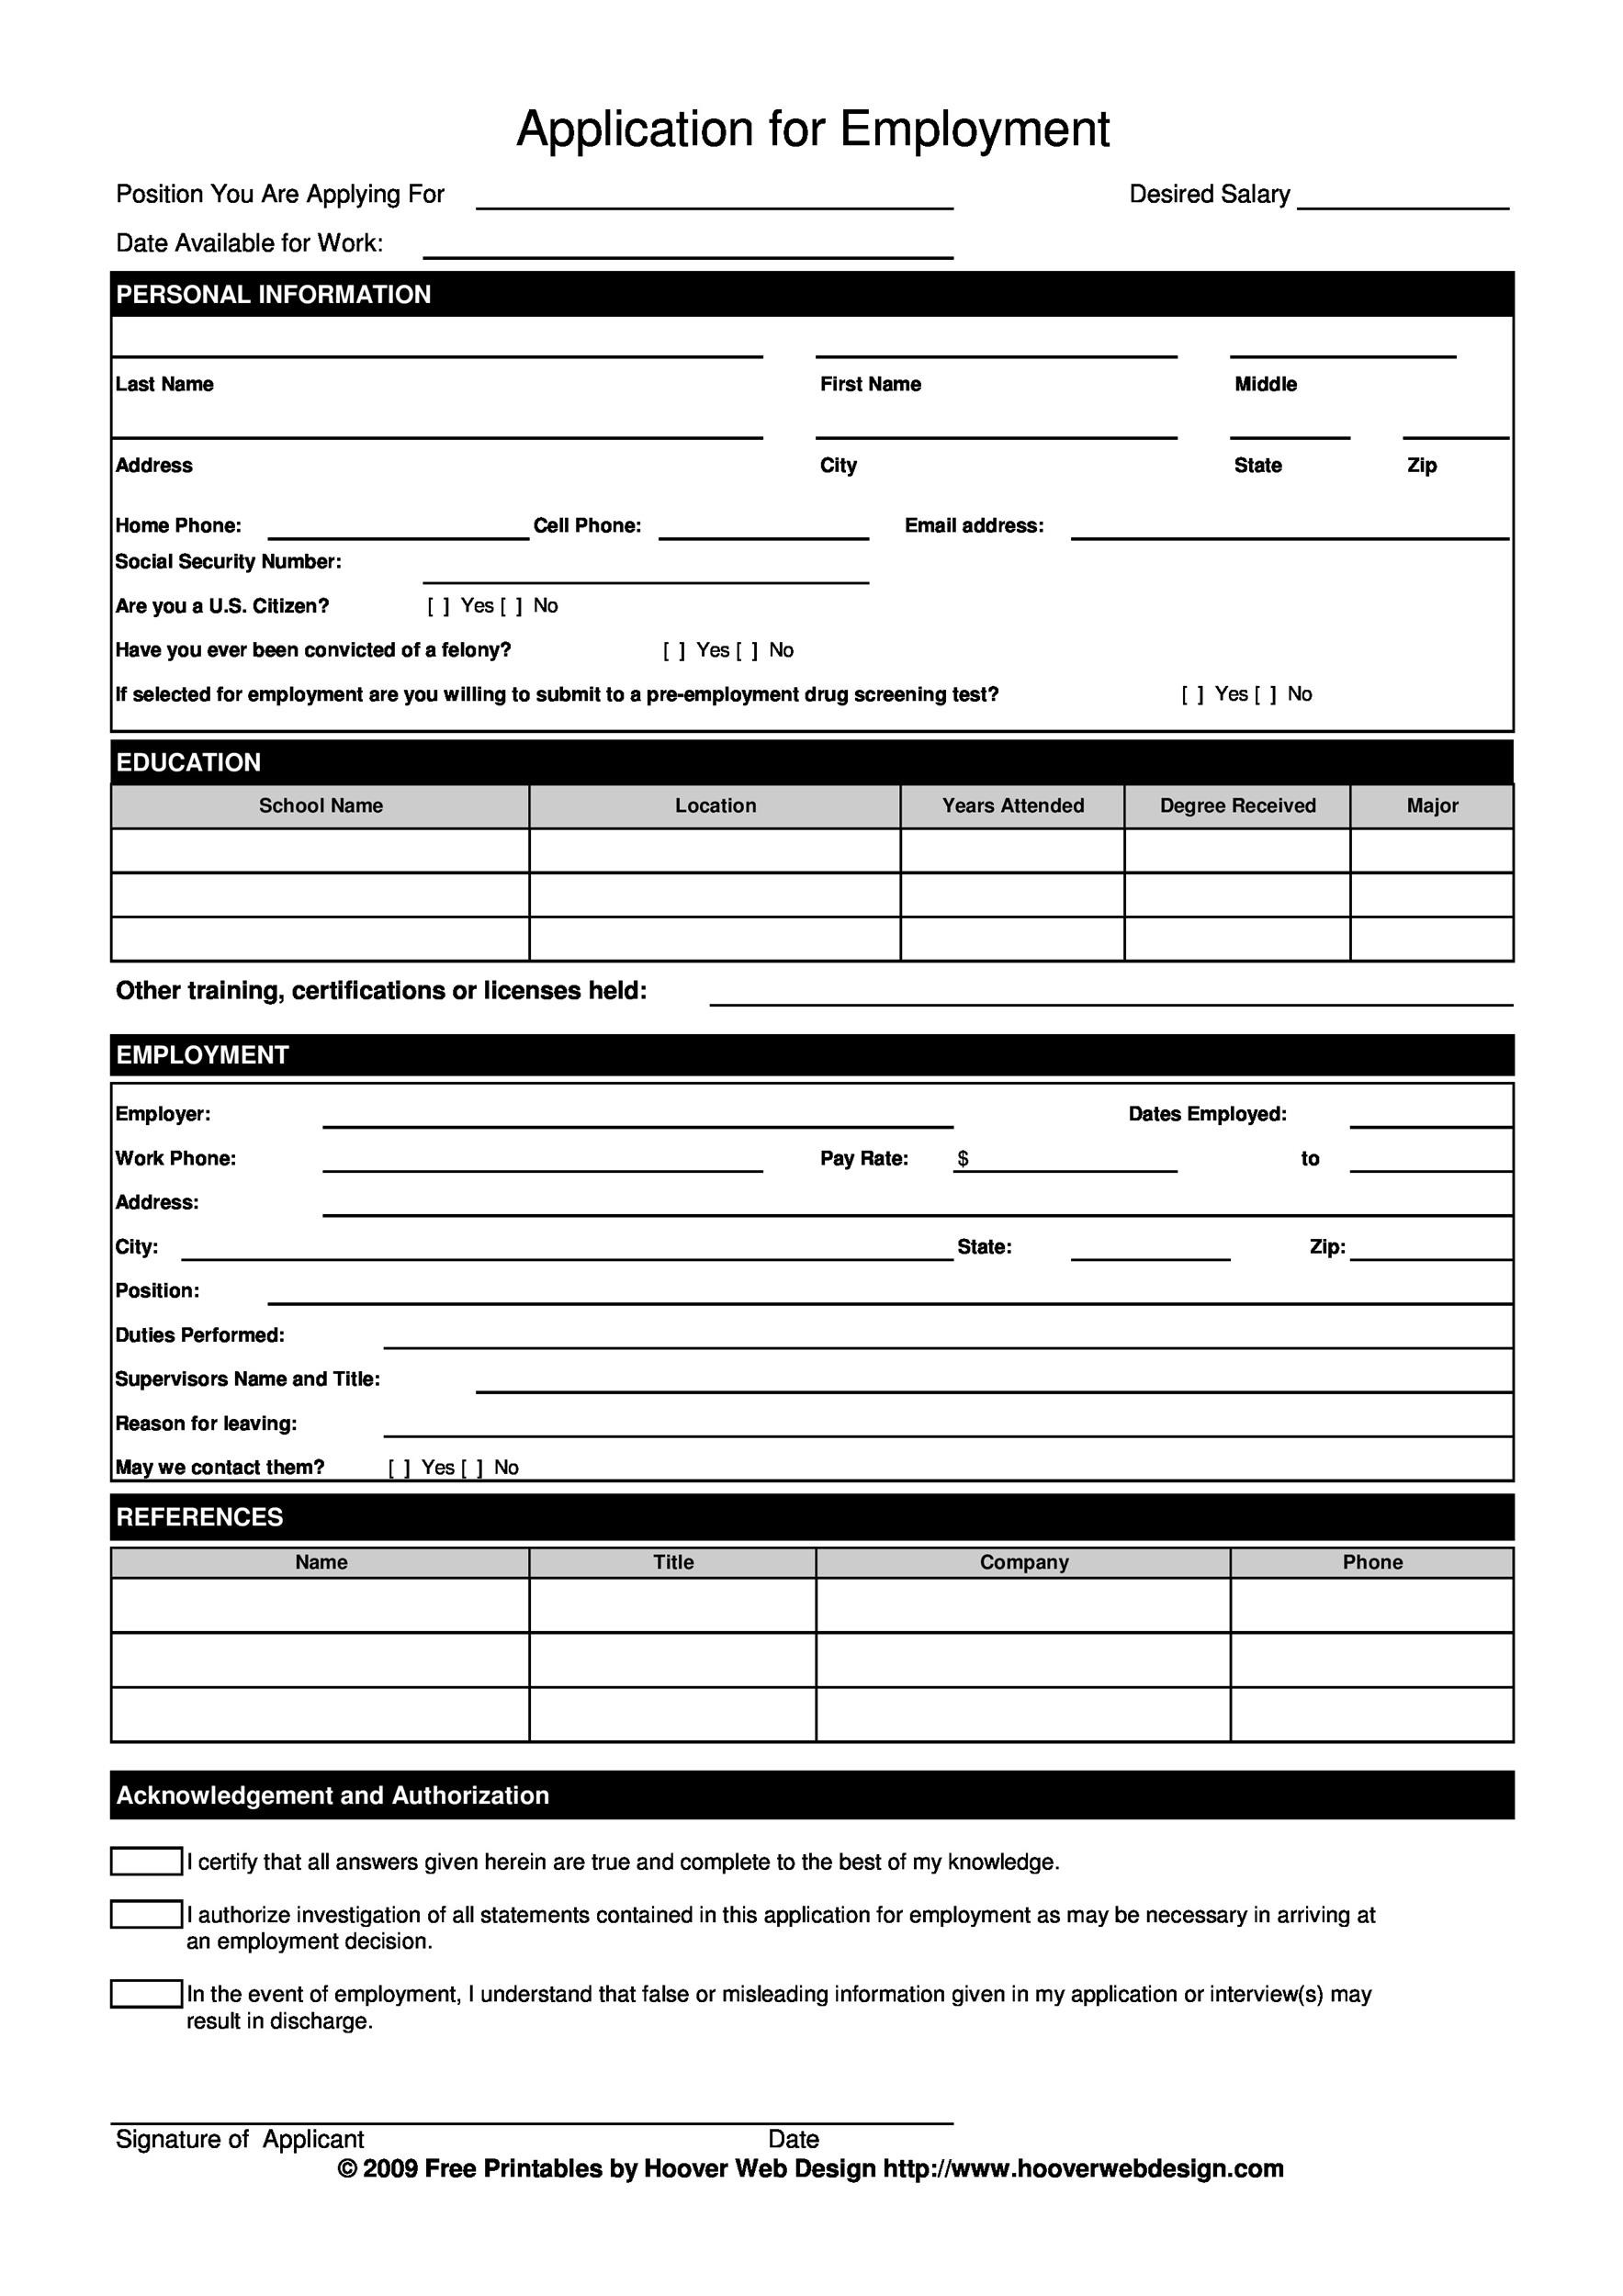 Free employment application template 01